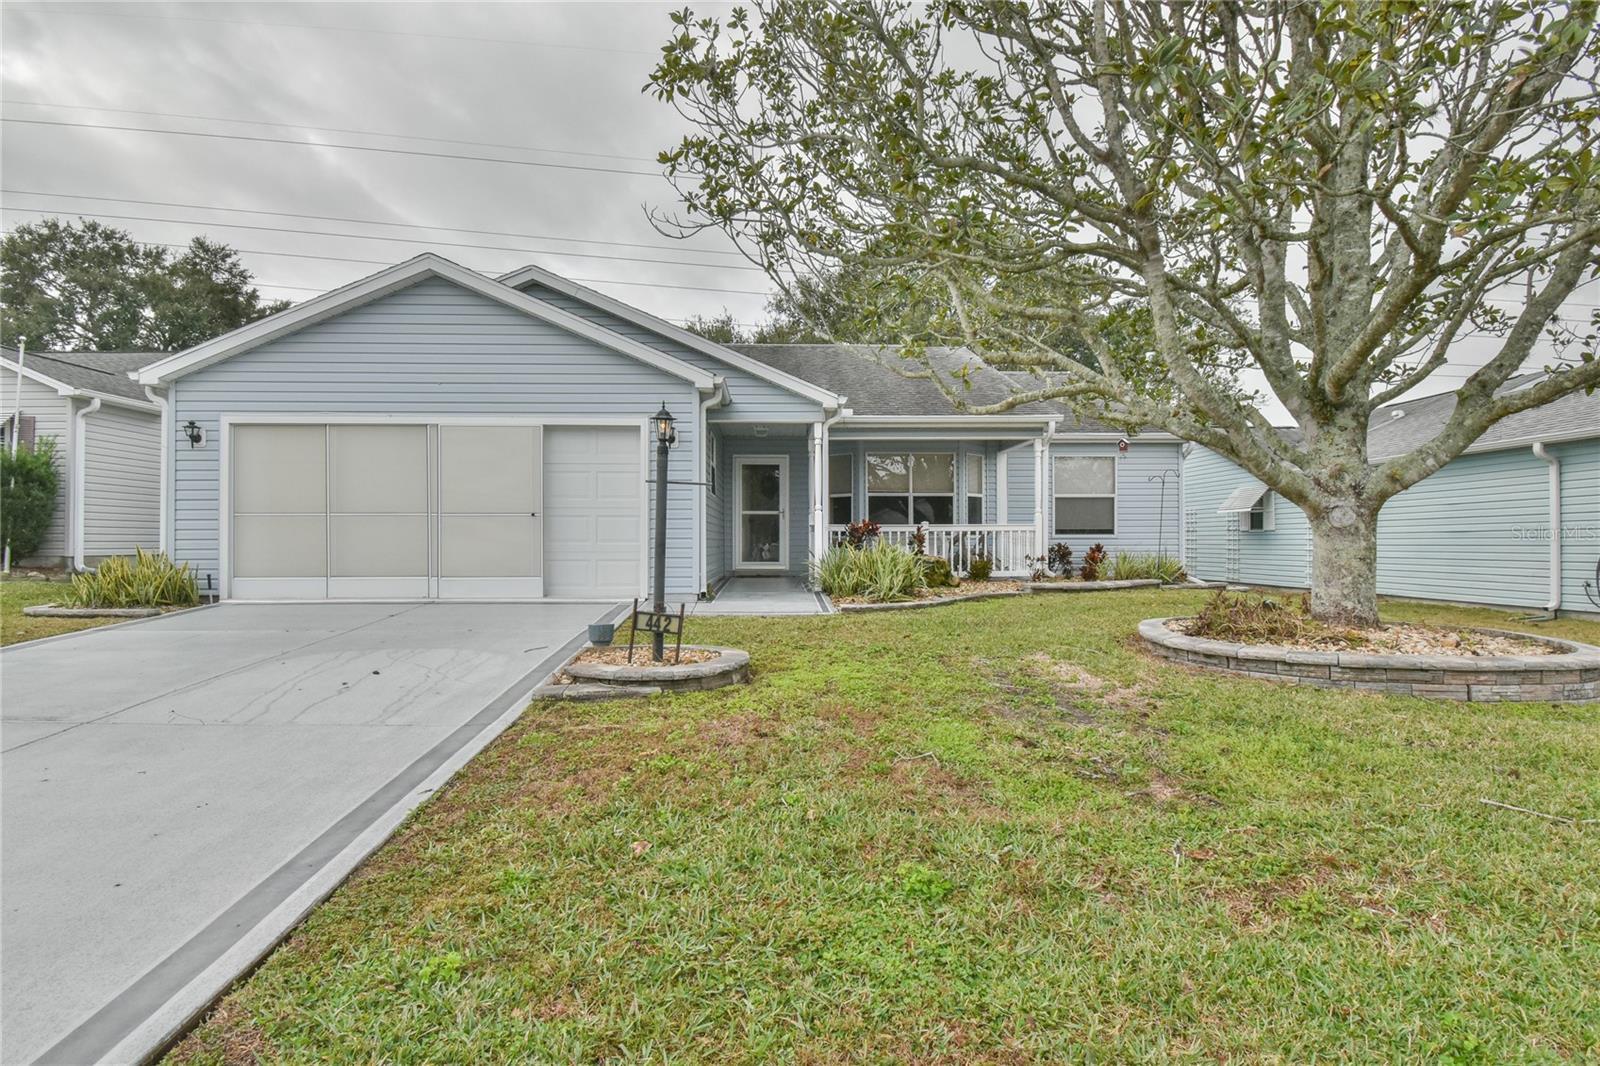 Photo one of 442 San Pedro Dr The Villages FL 32159 | MLS G5076800